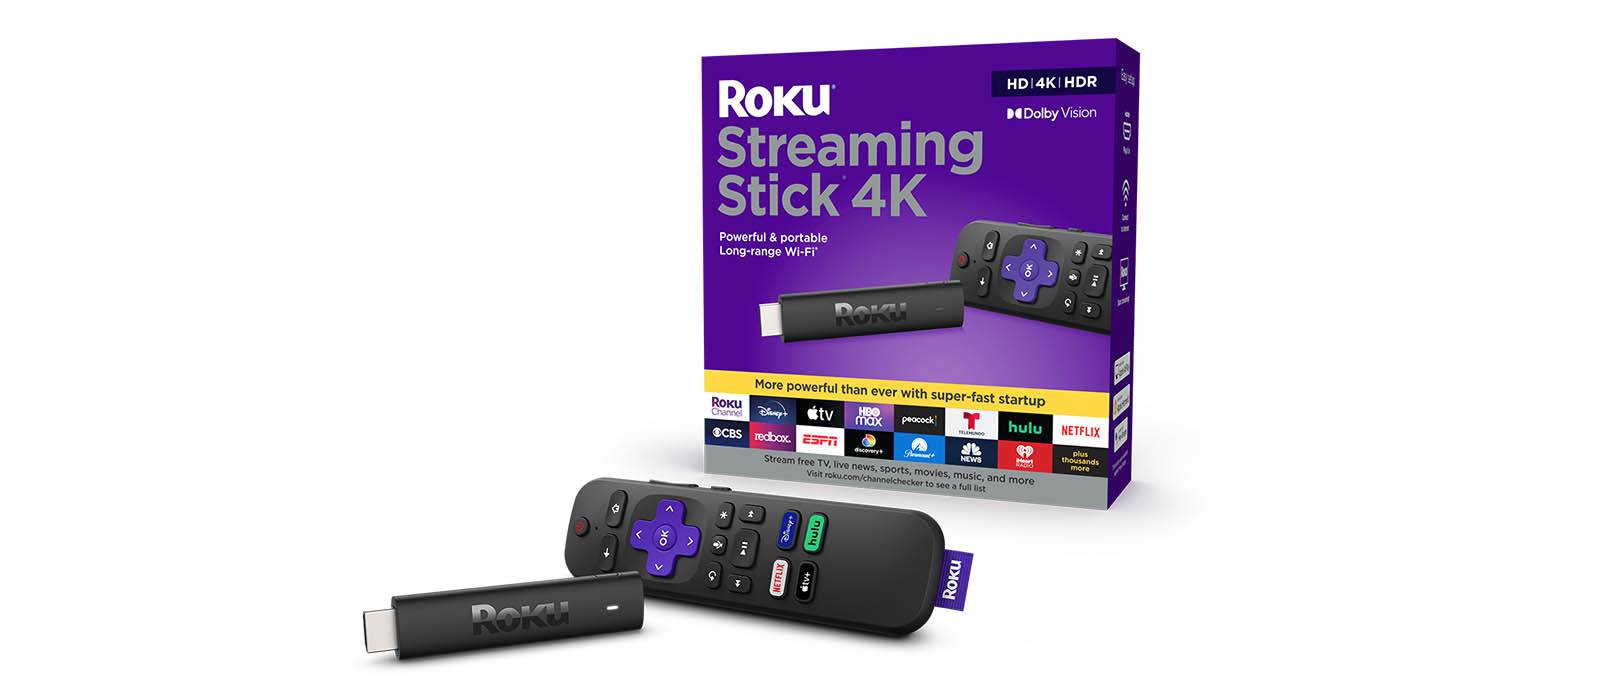 Roku Streaming Stick 4K Adds Dolby Vision, HDR10+ Support — CPU, WiFi Upgrades Also On Board